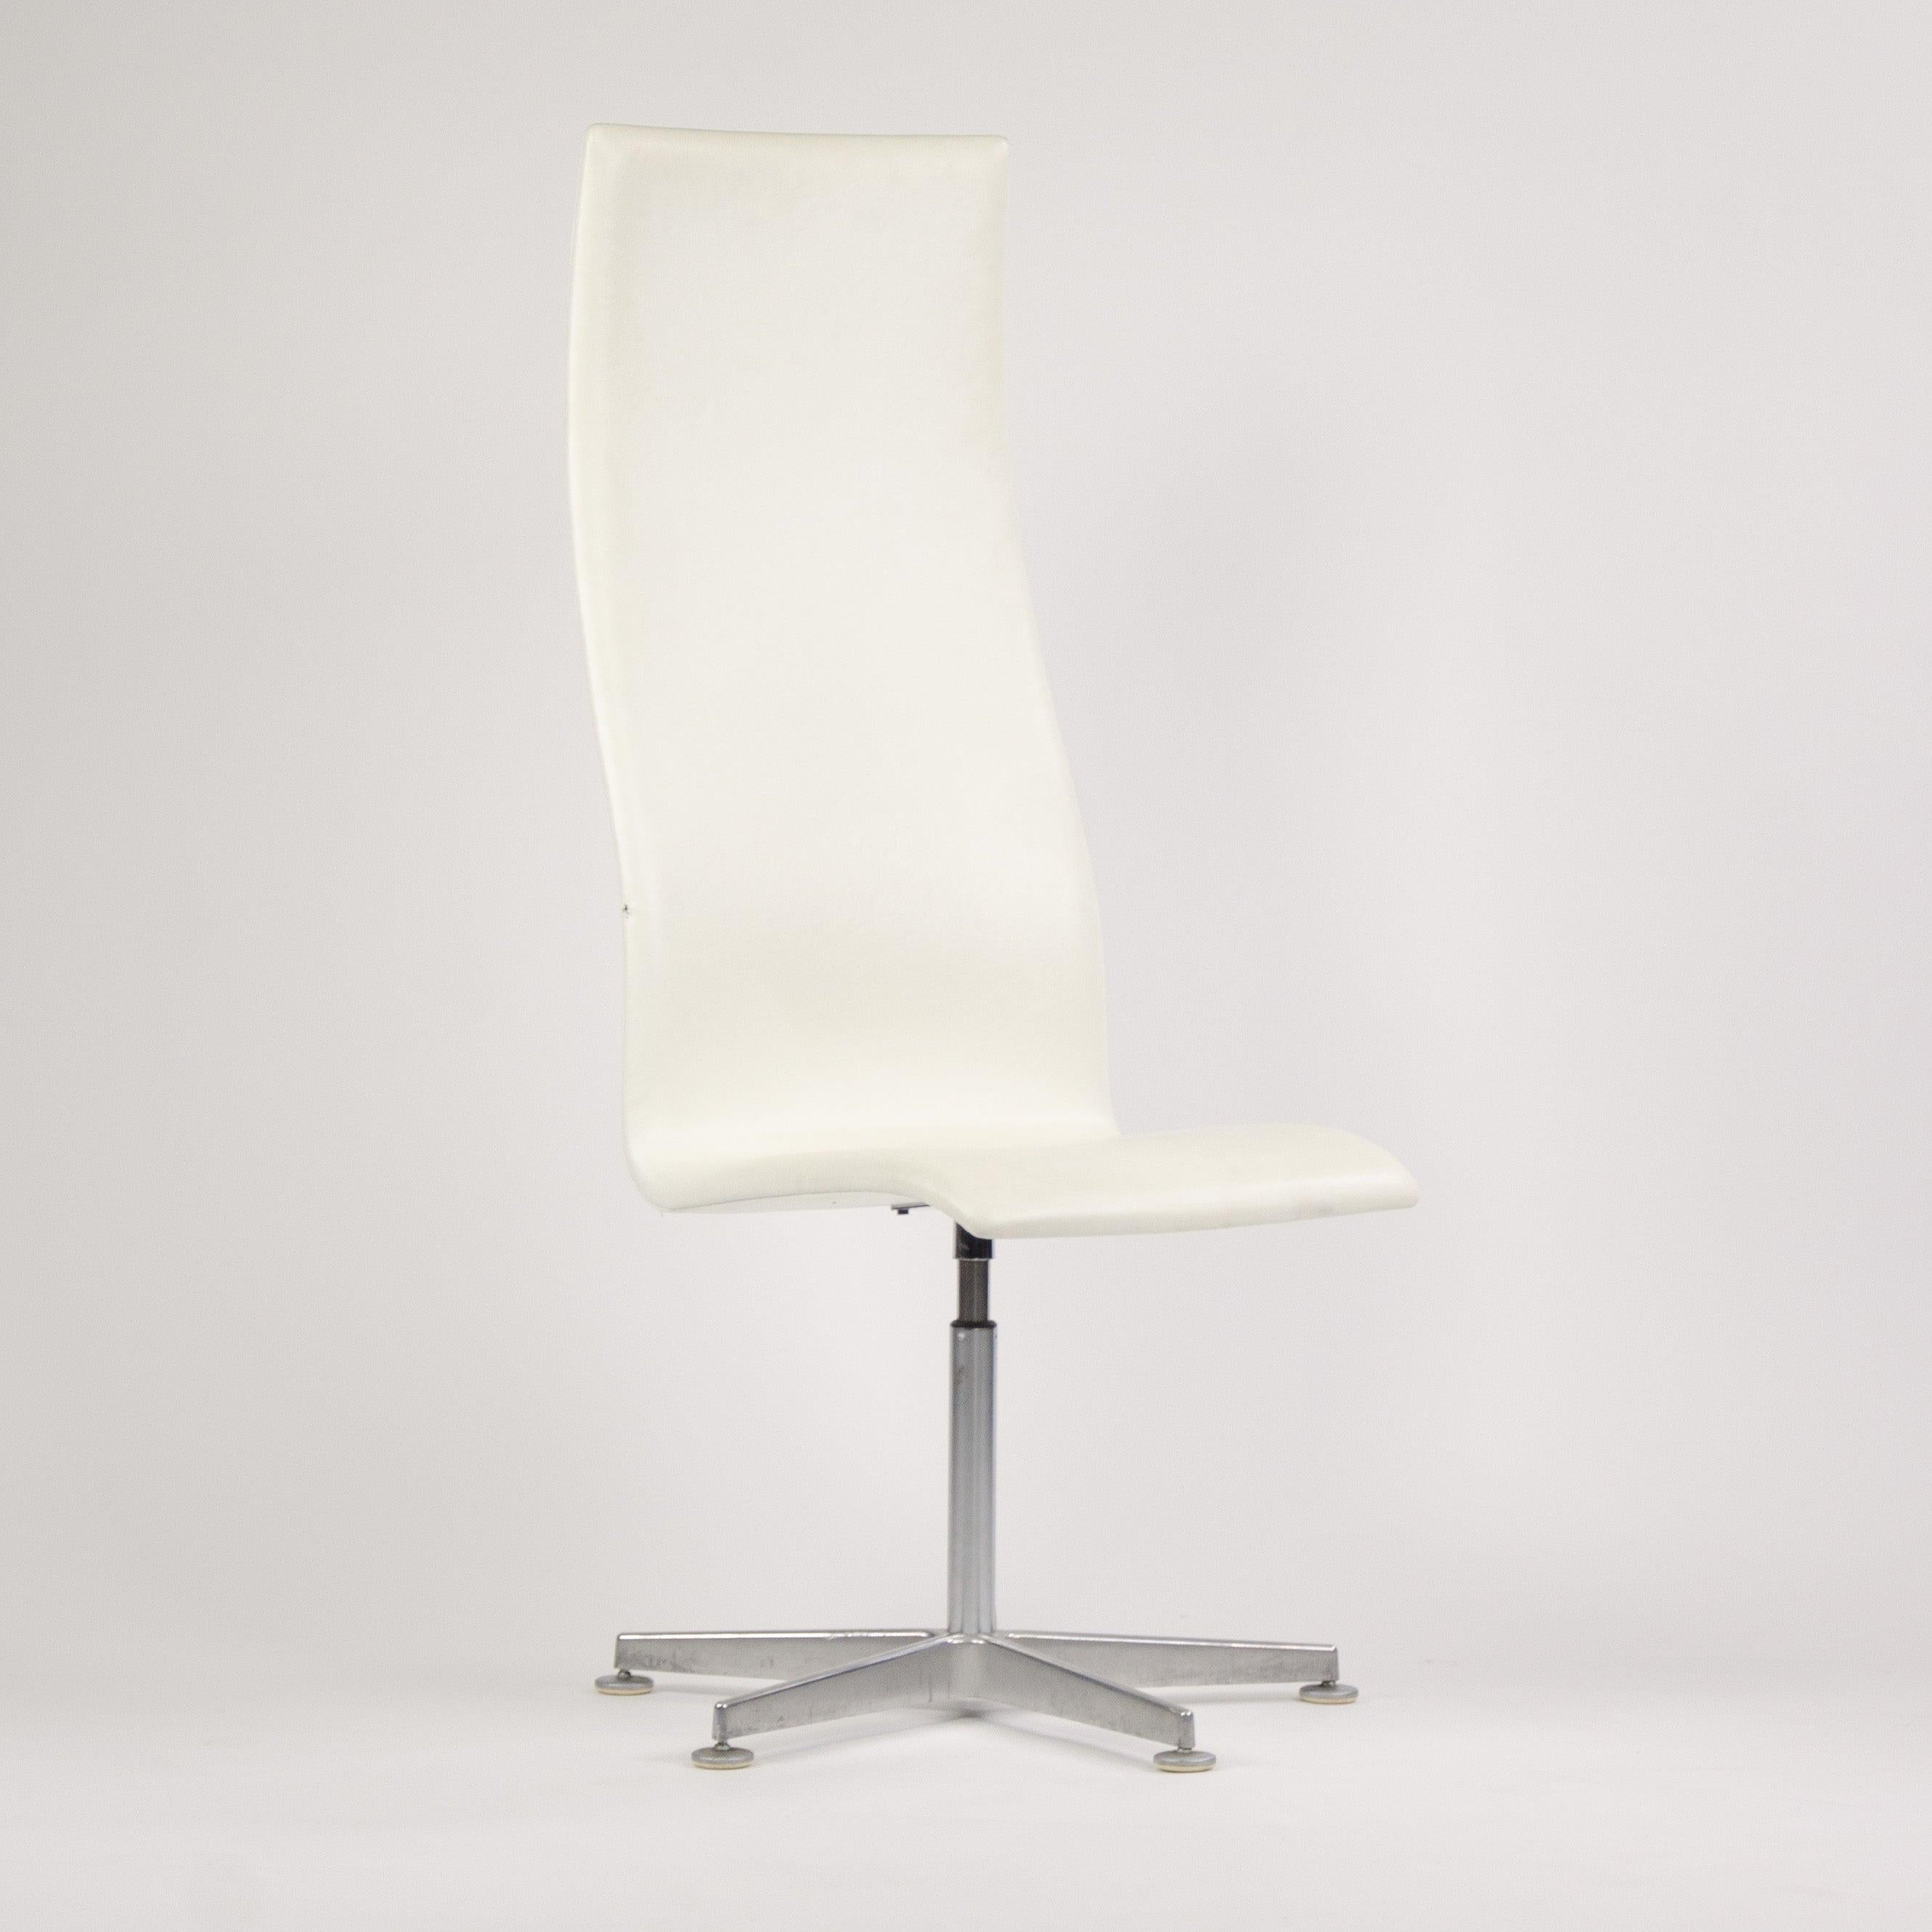 Fritz Hansen Arne Jacobsen Tall Oxford Chair White Leather 2007 4x Available For Sale 3